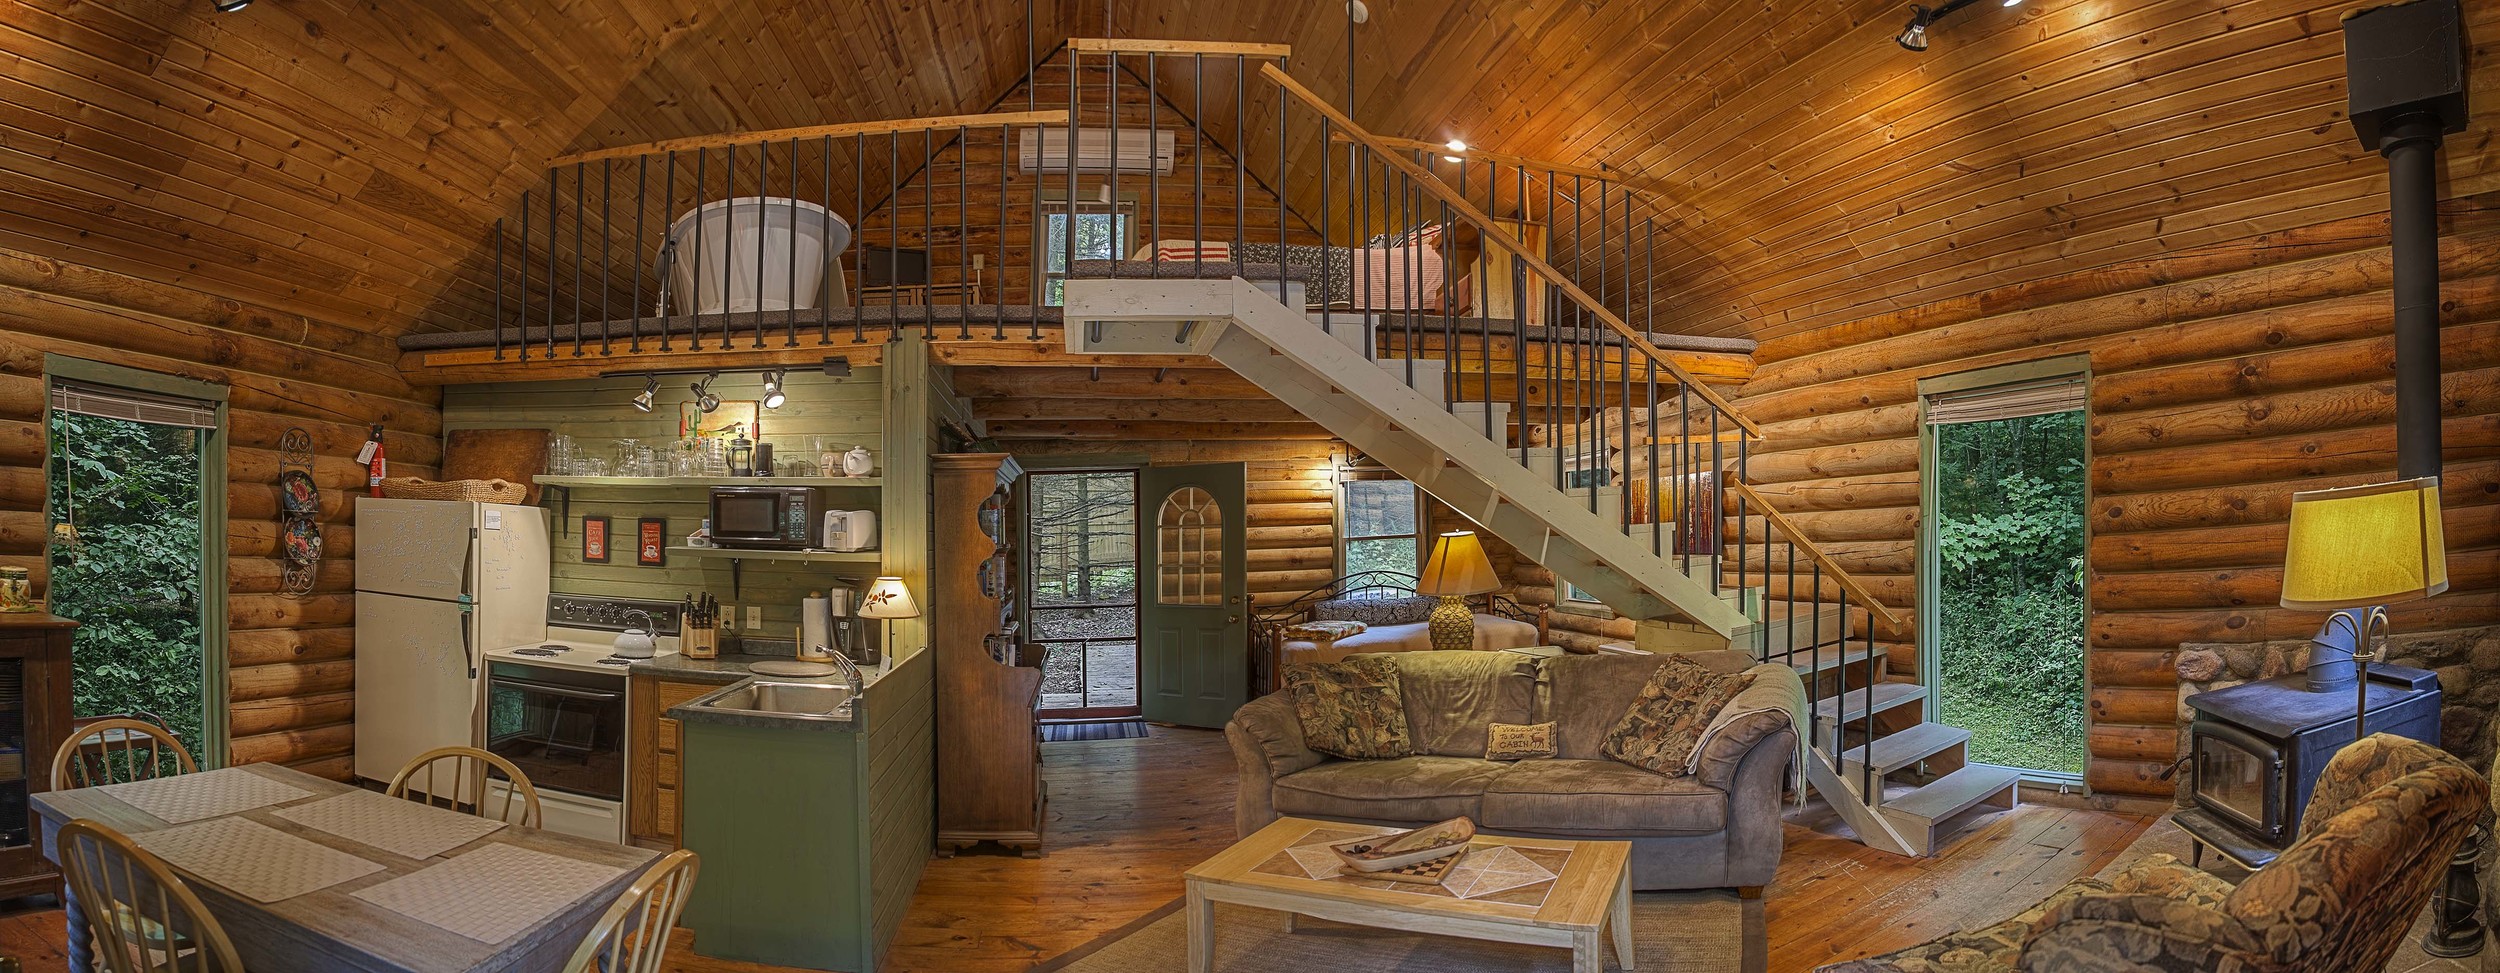 Inside the Log Cabin by Candlewood Cabins